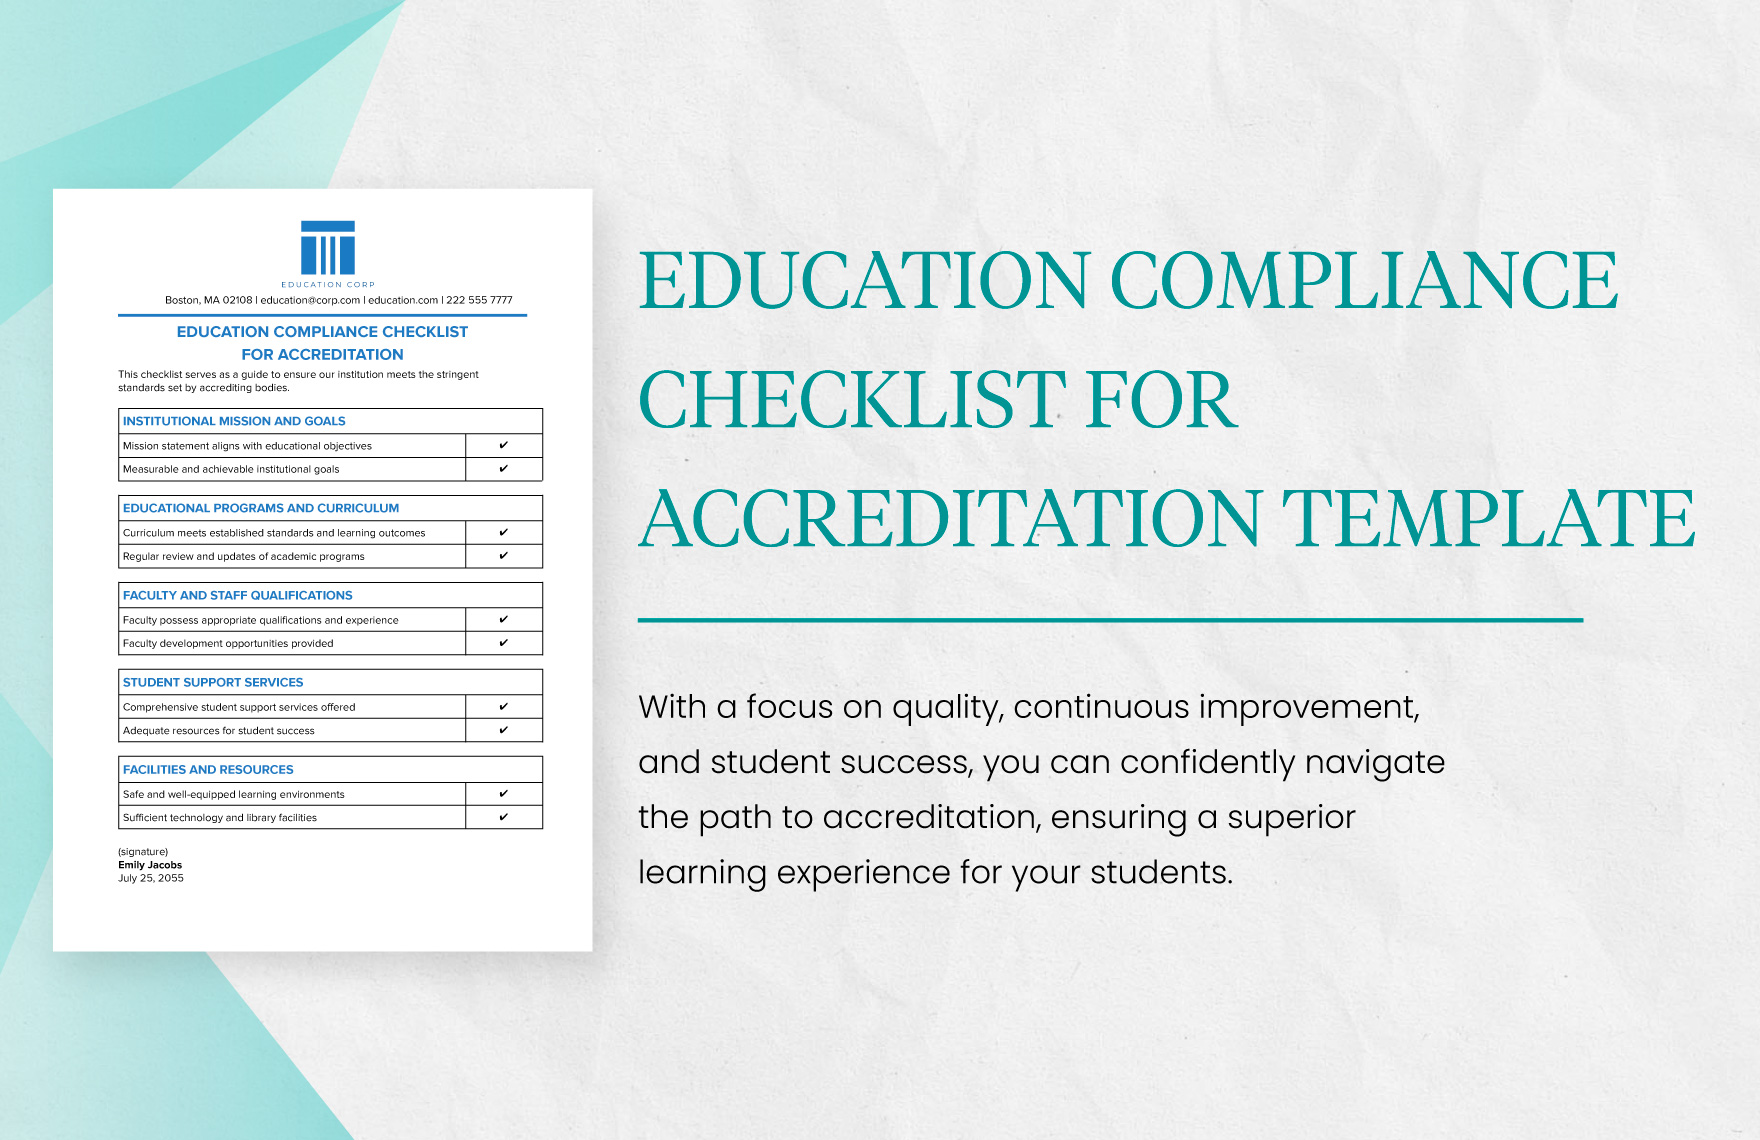 Education Compliance Checklist for Accreditation Template